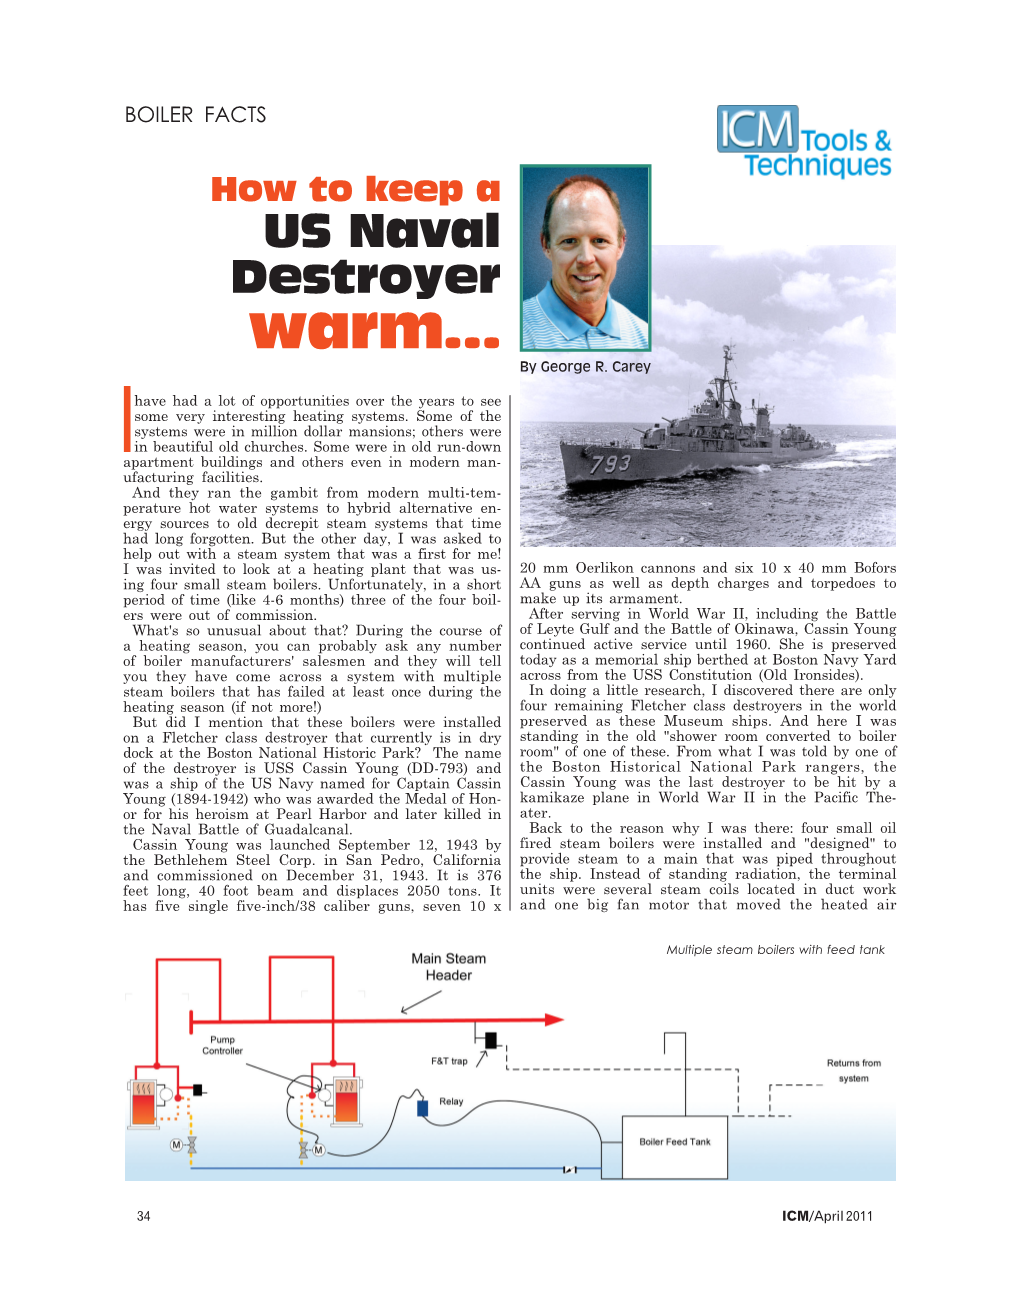 How to Keep a US Naval Destroyer Warm